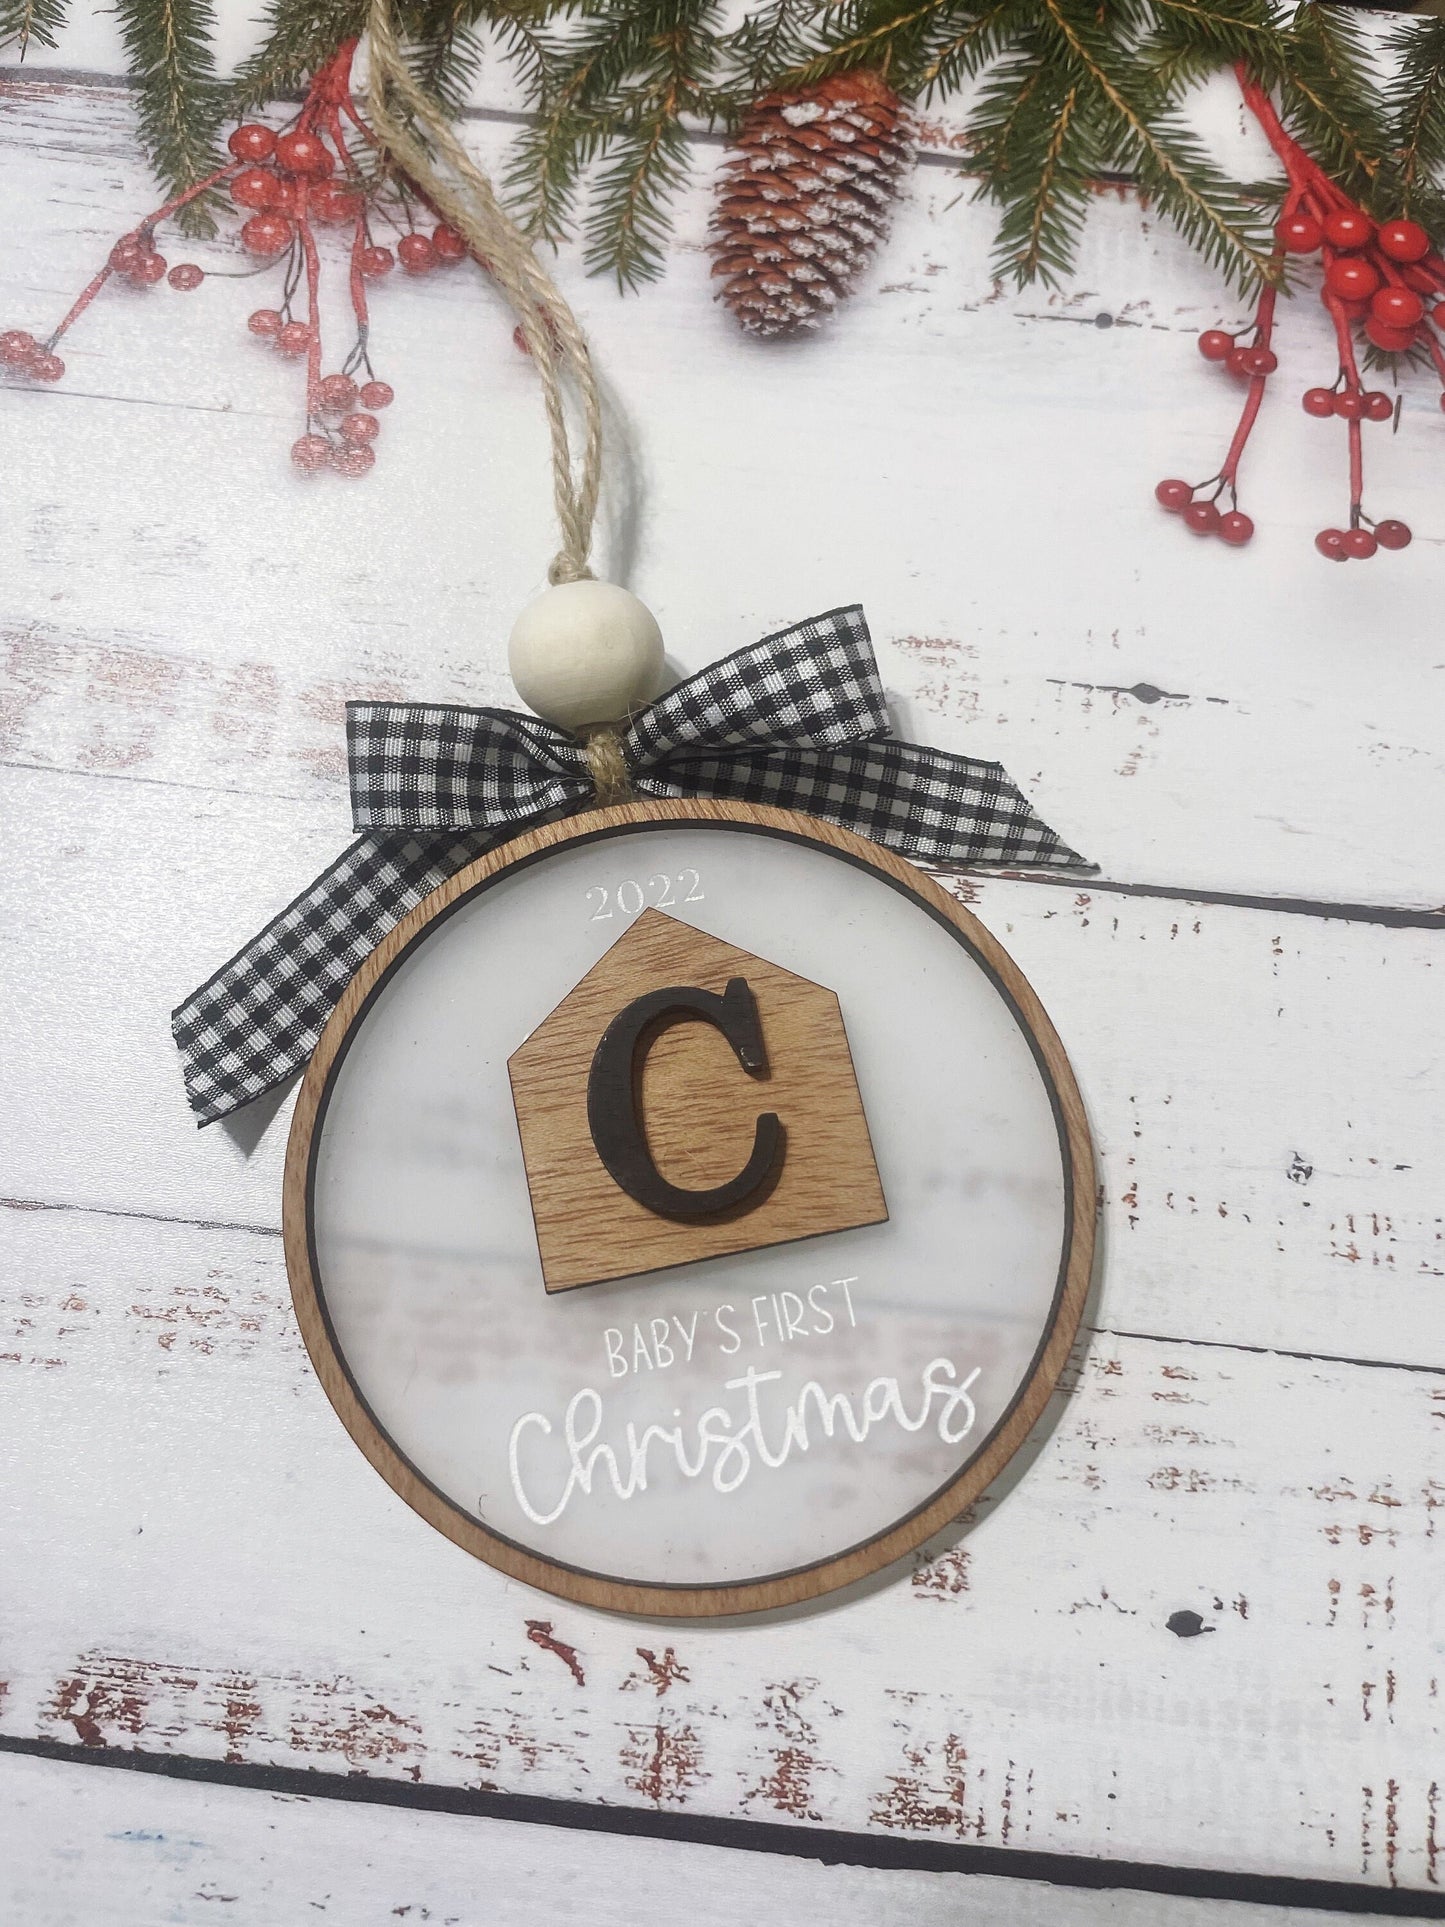 Baby's First Christmas Ornament 2023 | Personalized Wooden Christmas Ornament